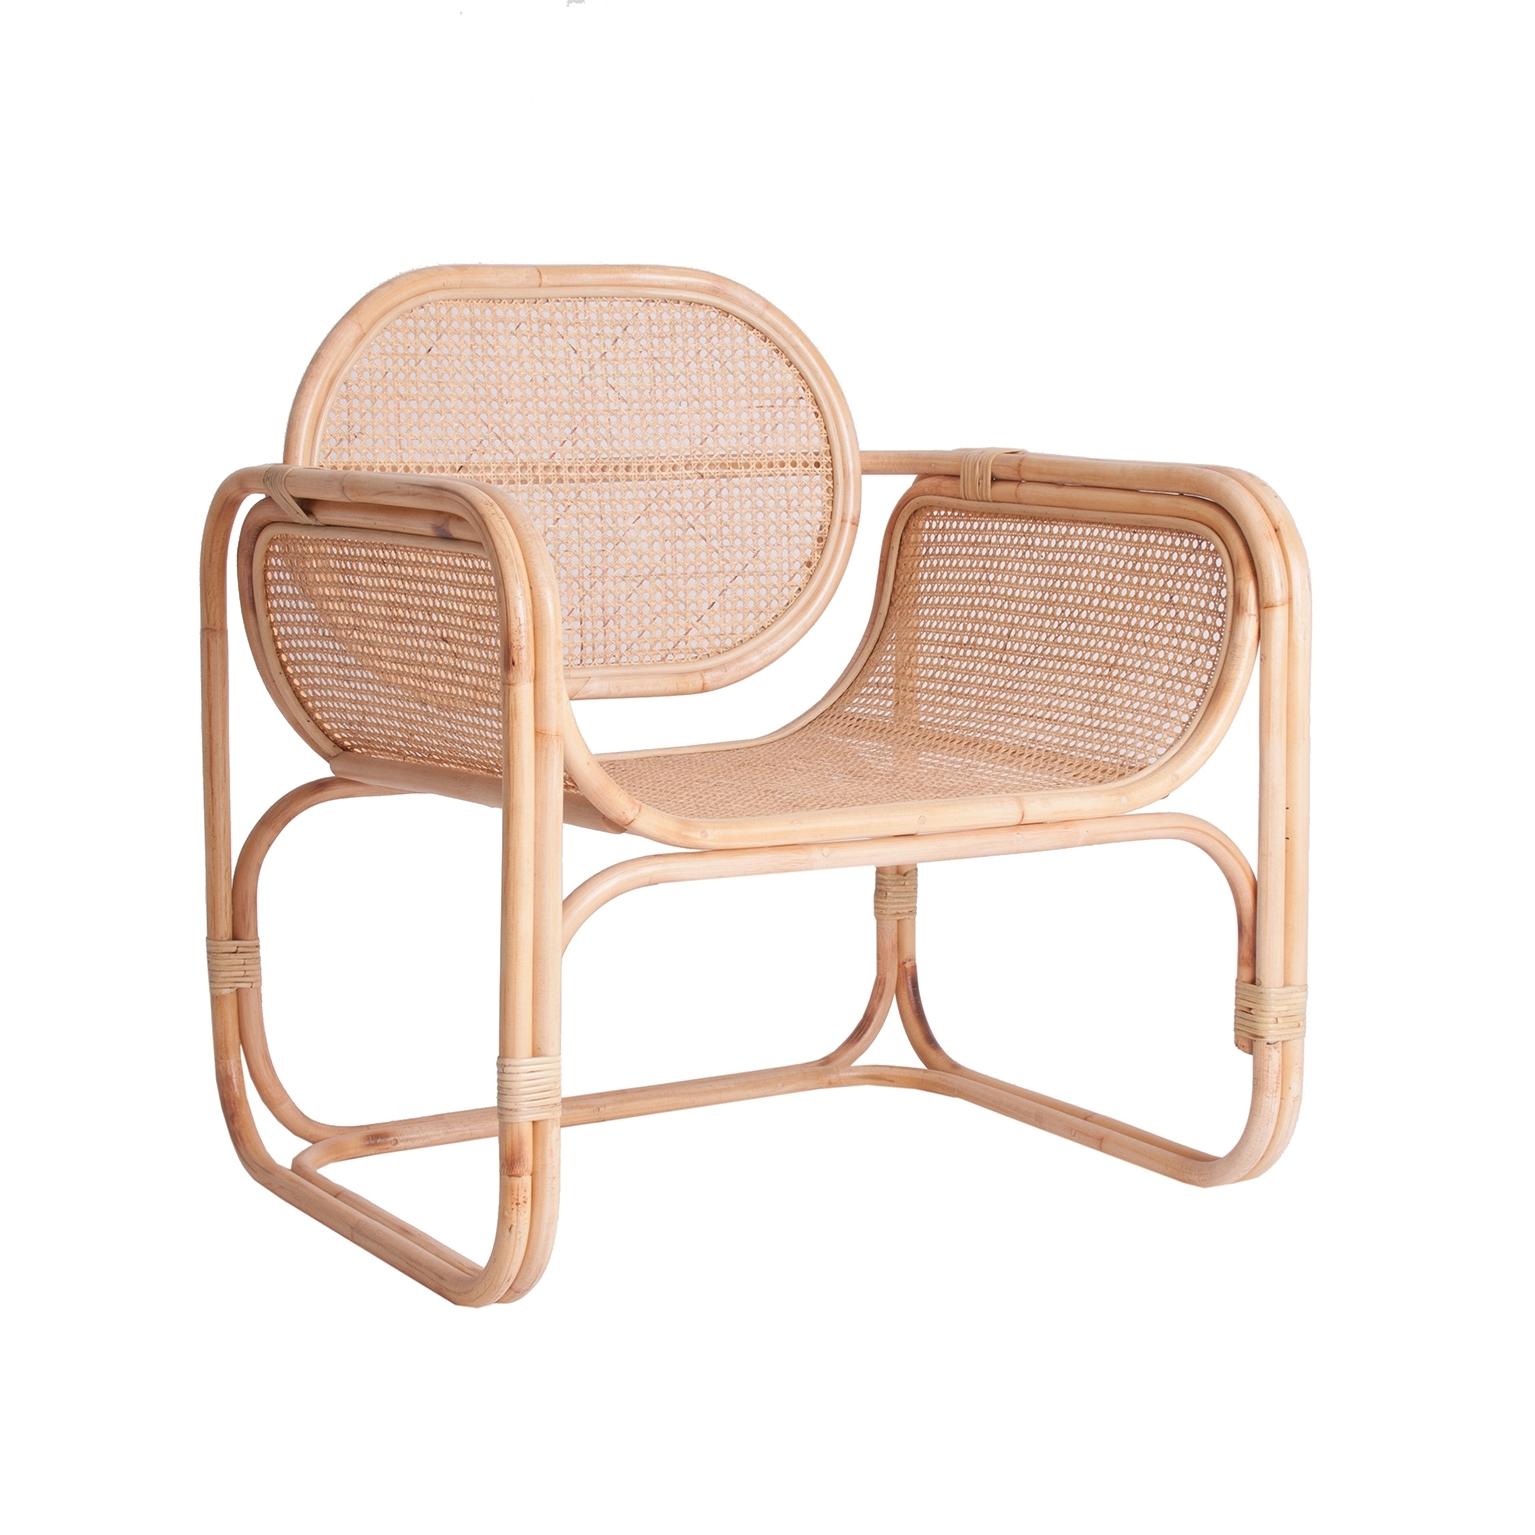 Design and original lounge armchair with cane and natural rattan airy structure at the manner of Jan Bocan for Thonet.